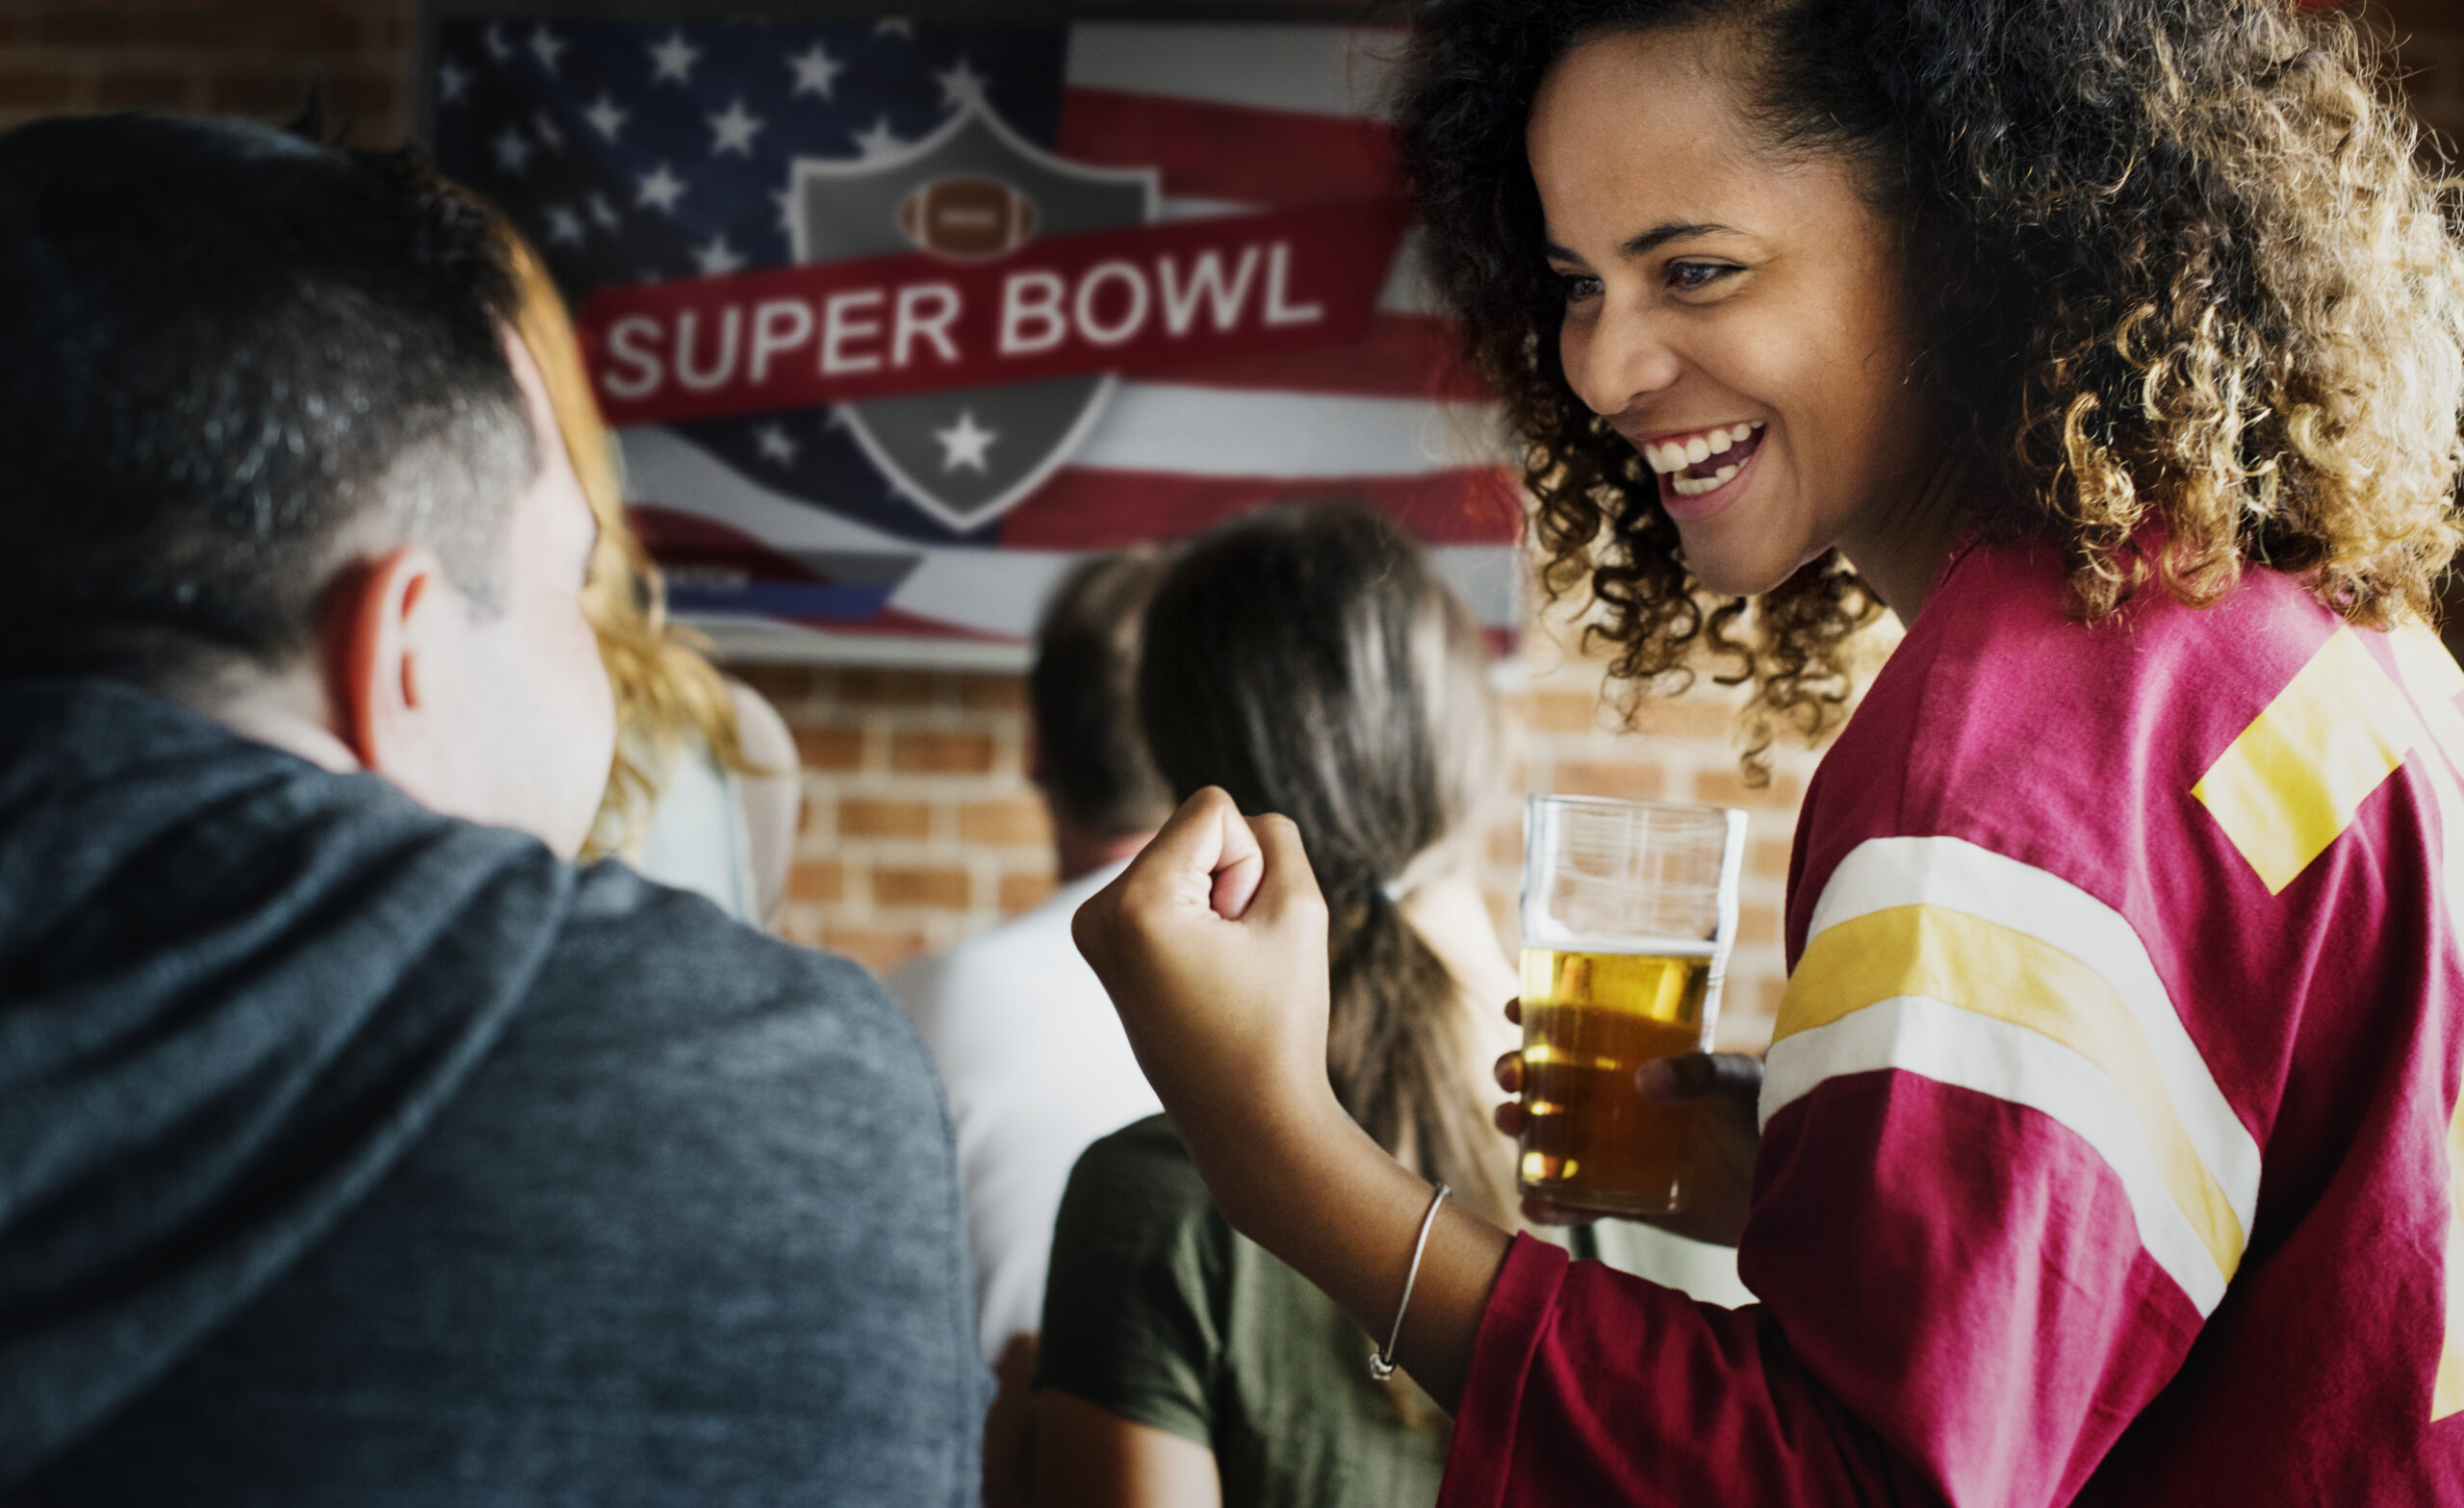 Super bowl watch party at a Franklin, Tennessee sports bar.